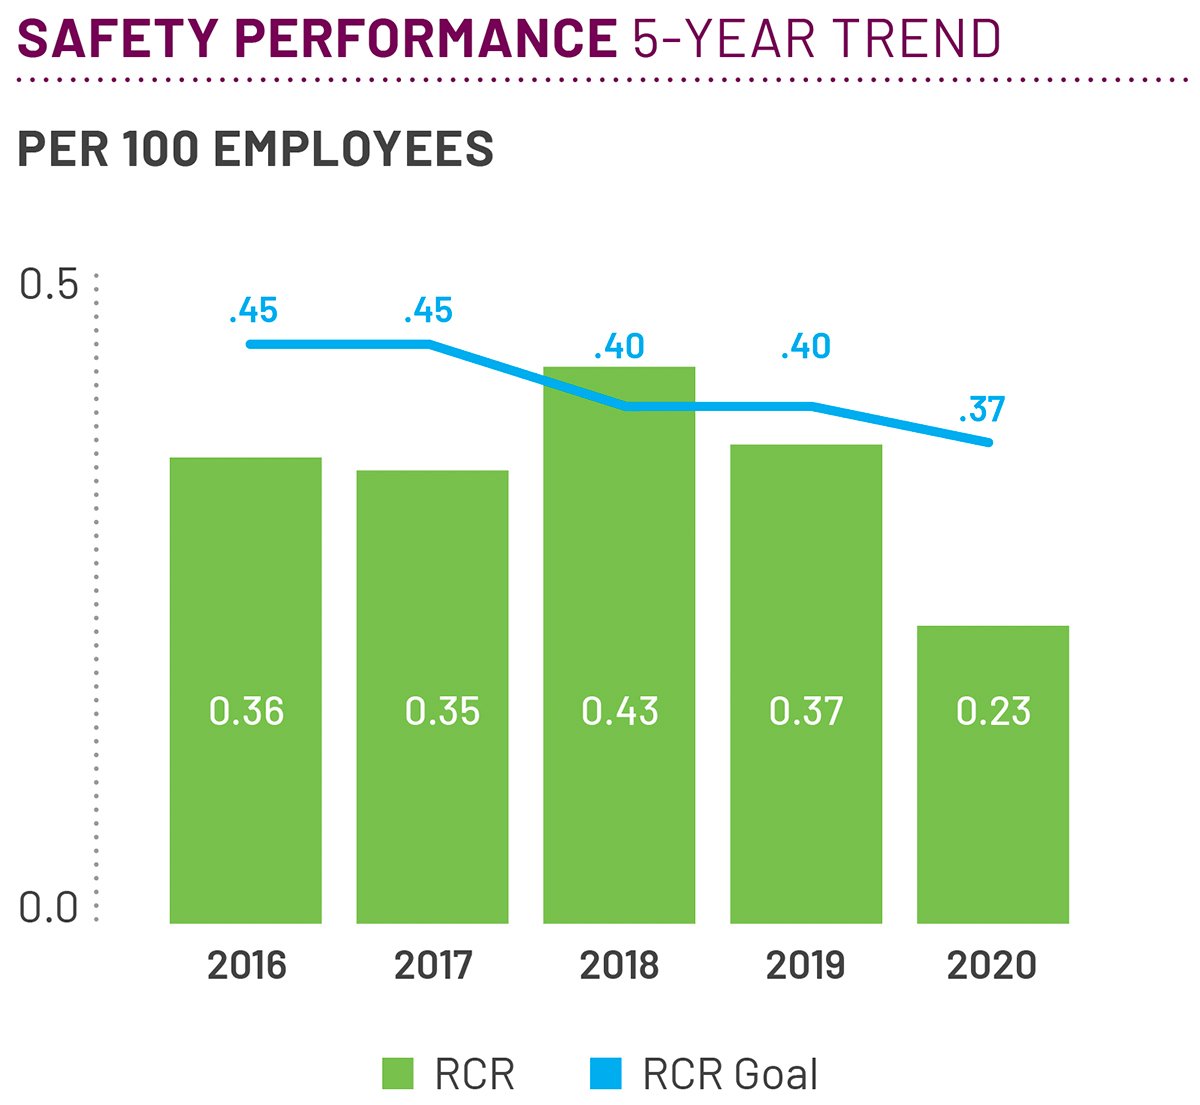 Chart of safety performance trend over 5 years up to 2020